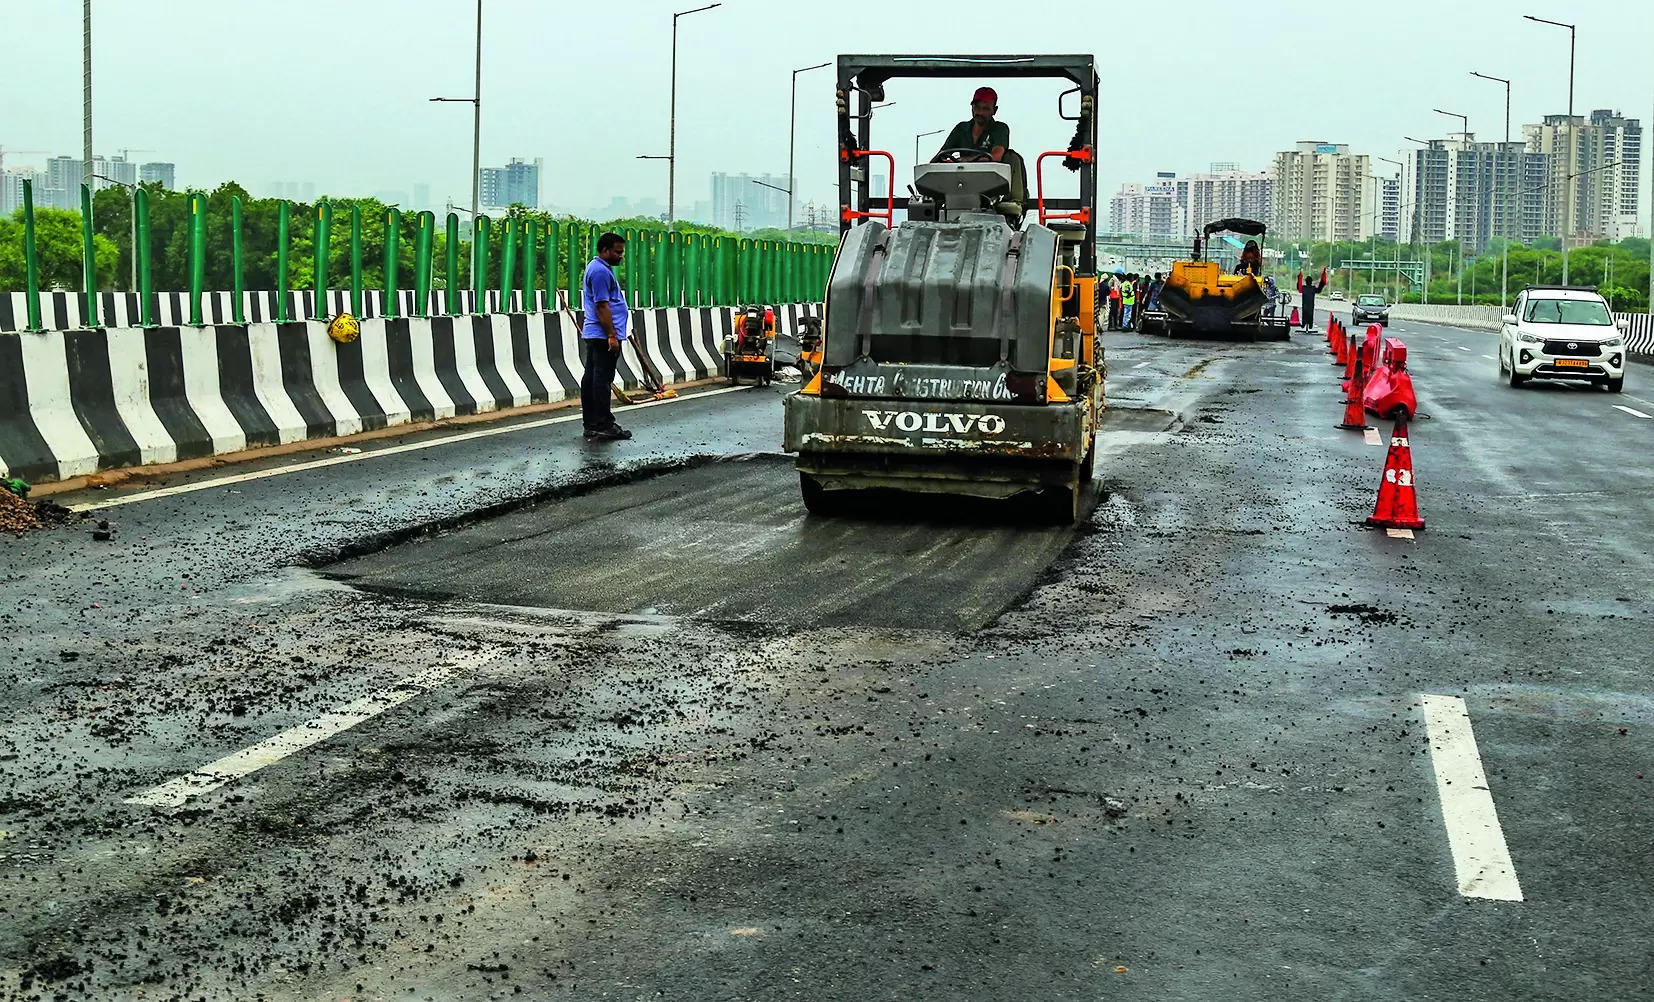 Gurgaon: 70m stretch of Dwarka expressway damaged 4 months after launch, repaired; NHAI to launch probe